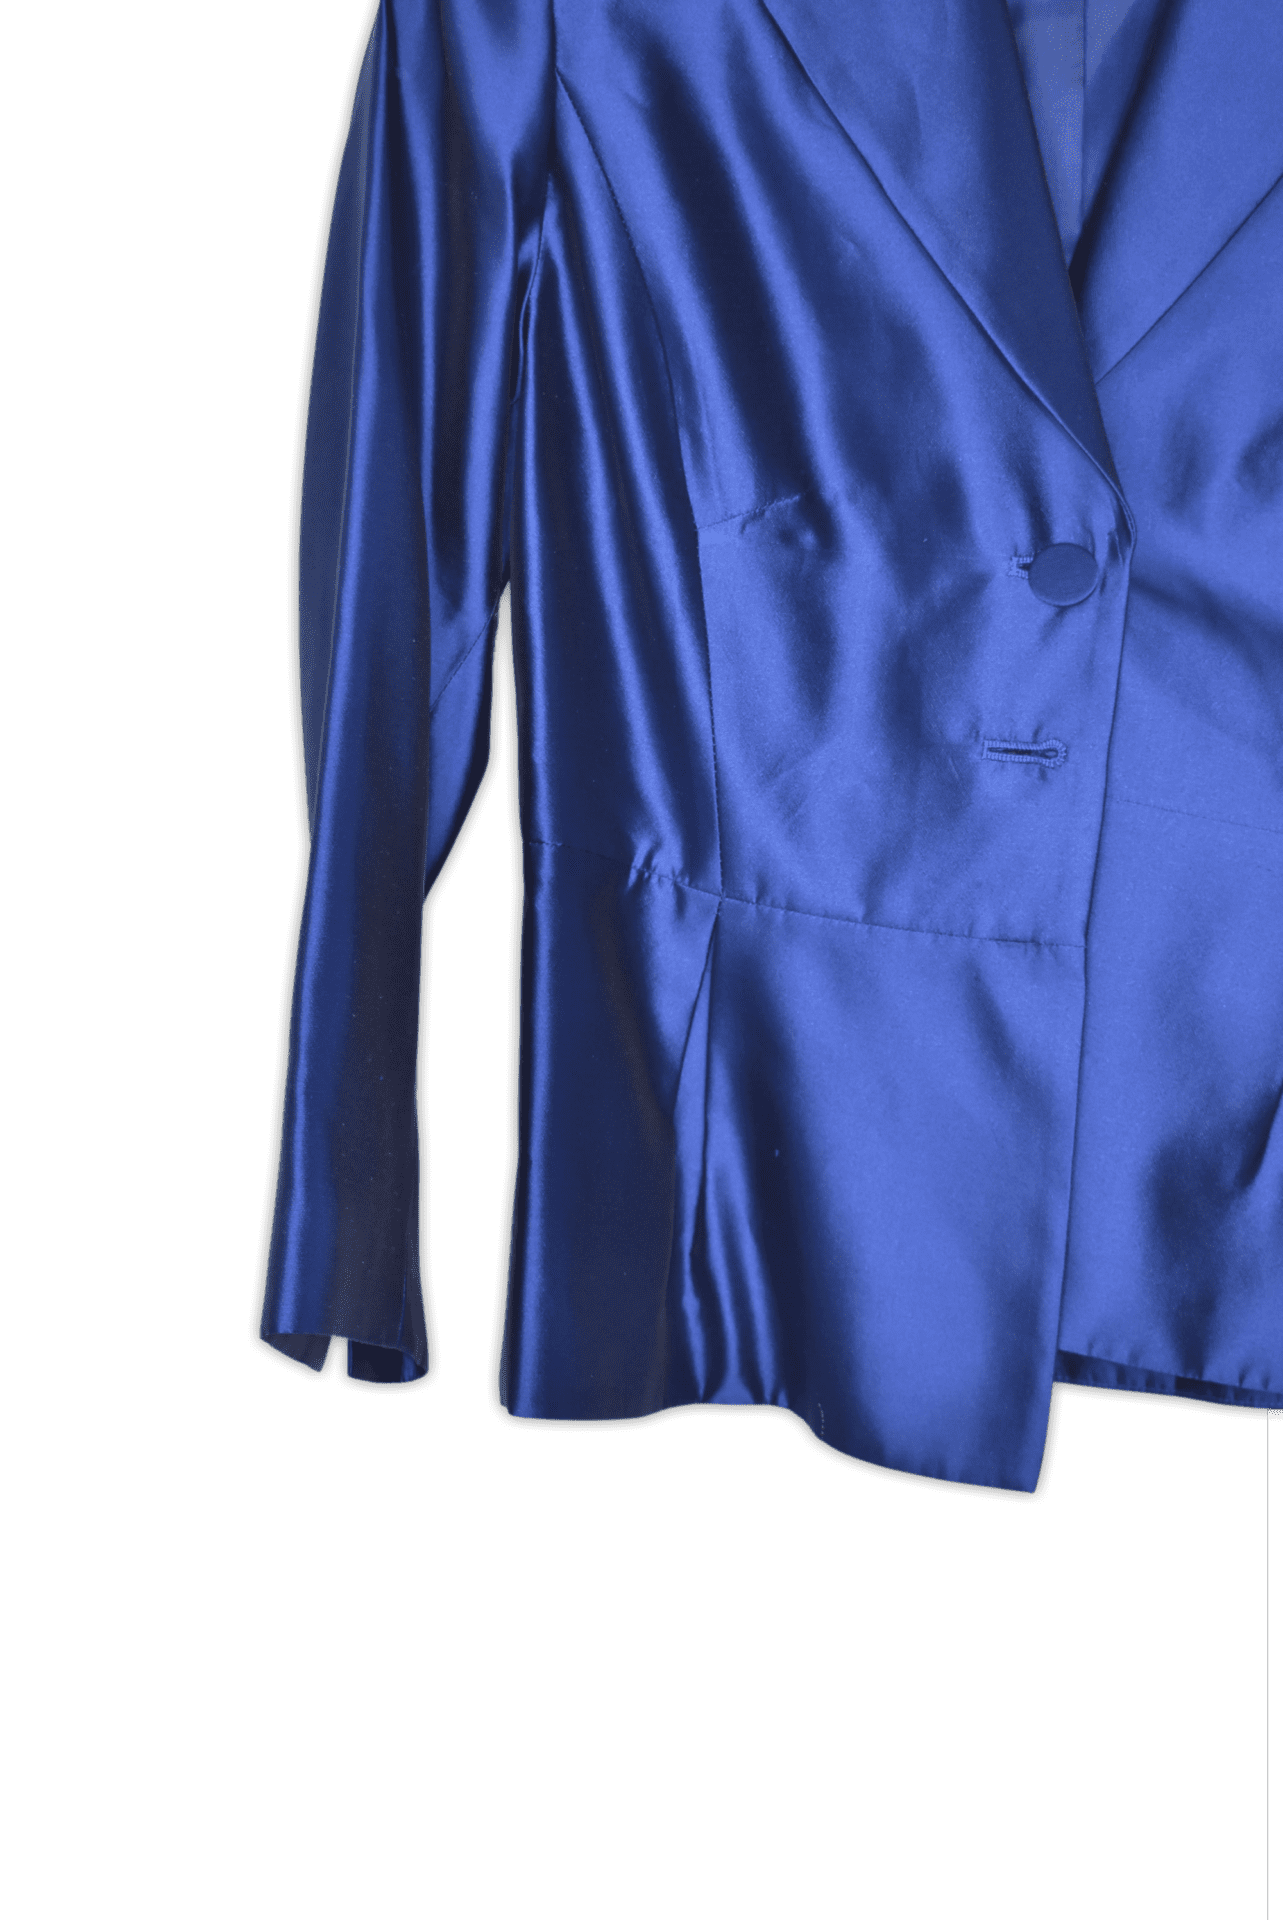 Formal blazer featuring a peplum flare hem and two front buttons. Made in Australia. Small, royal blue